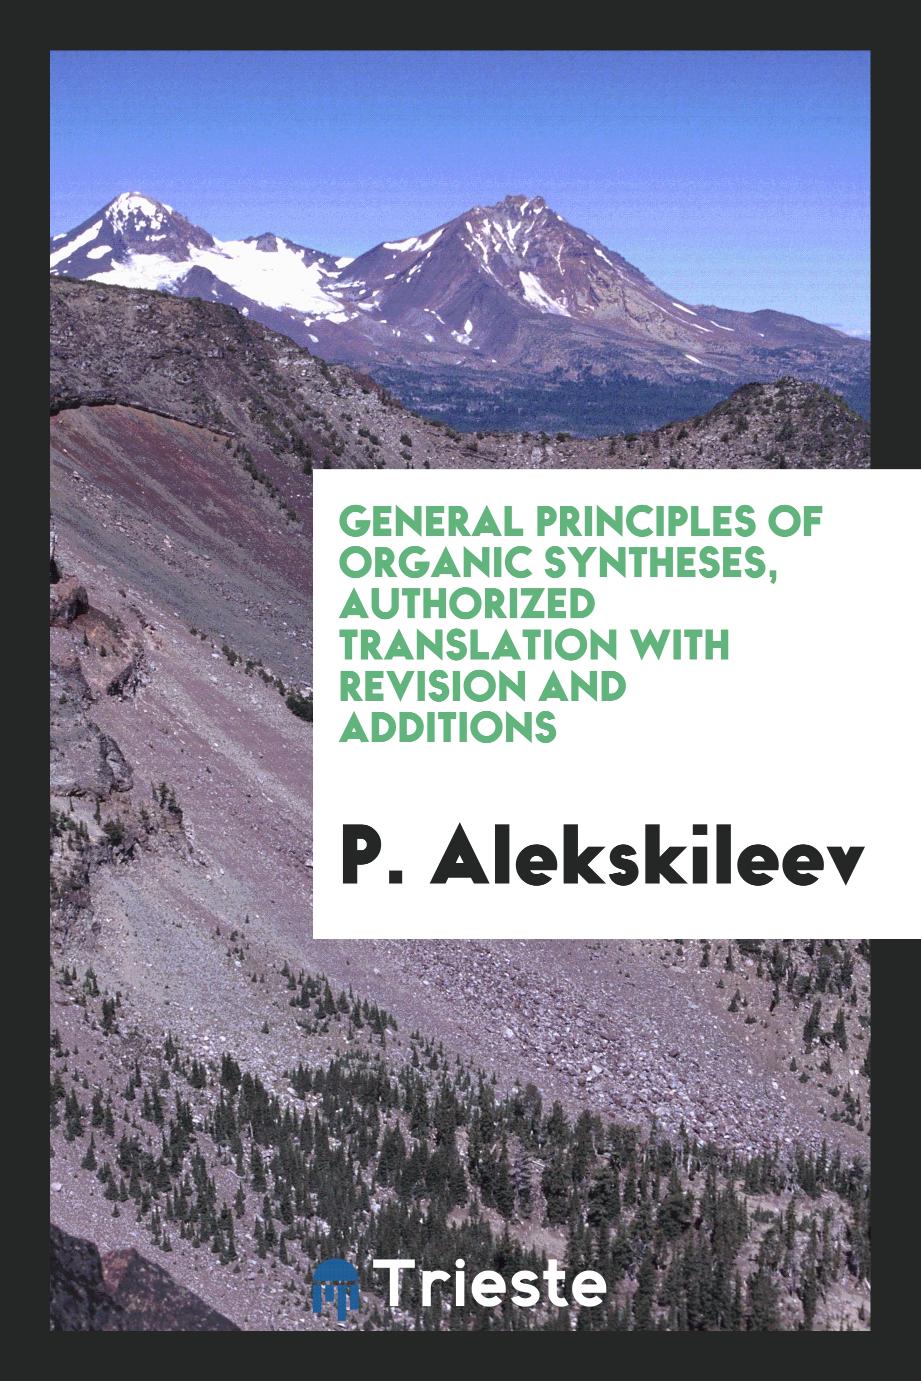 General principles of organic syntheses, authorized translation with revision and additions